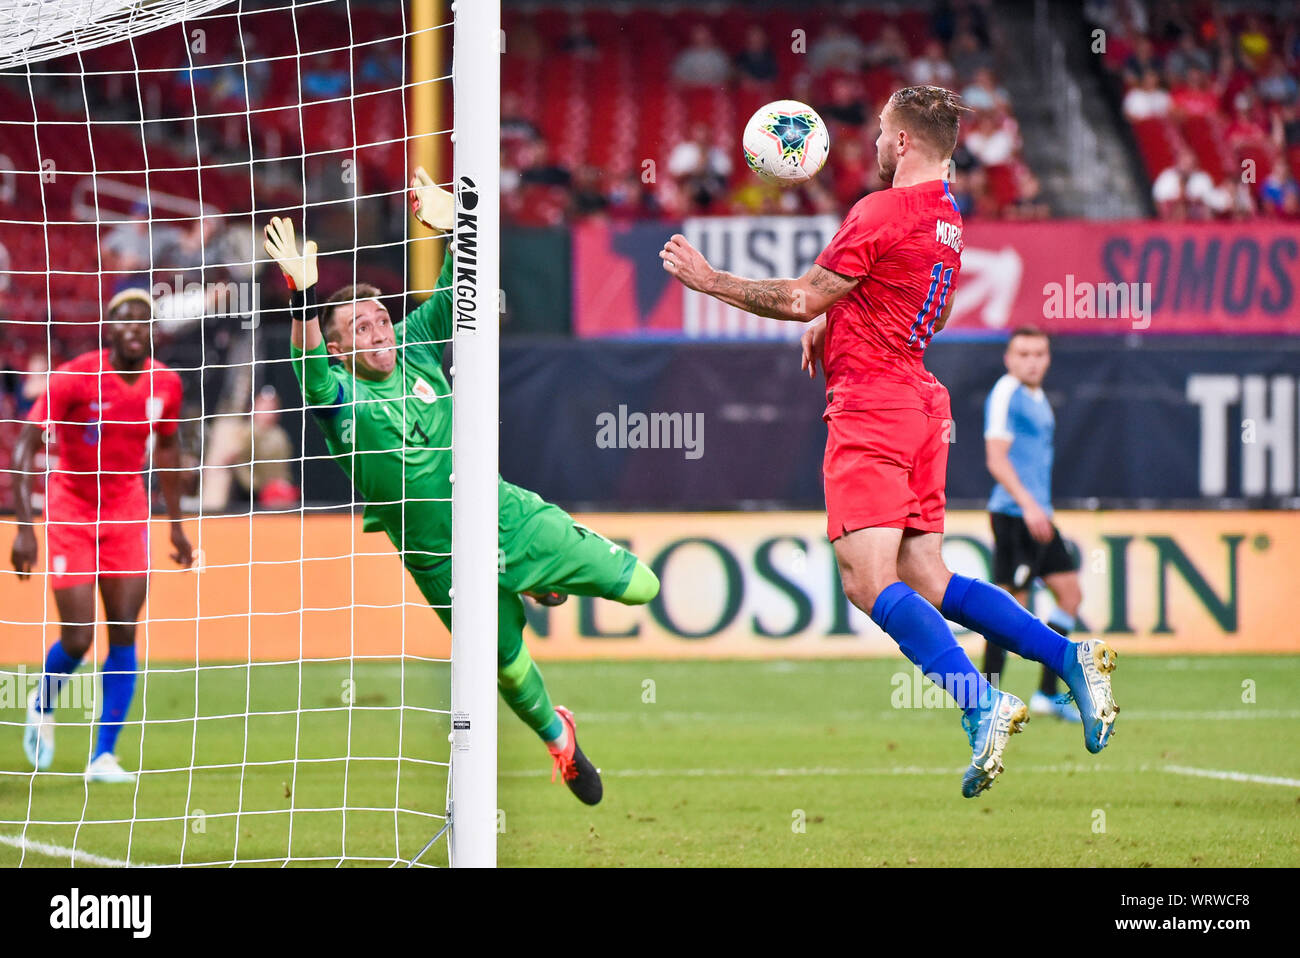 St. Louis, Missouri, USA. 10th Sep, 2019. US Men's National Team forward Jordan Morris (11) deflects the ball with his chest past Uruguay goalkeeper Fernando Muslera (1) for a goal to tie the game up at 1 to 1 during the final match before the Concacaf Nations League as the United States Men's National Team hosted Uruguay at Busch Stadium in St. Louis City, MO Ulreich/CSM/Alamy Live News Stock Photo